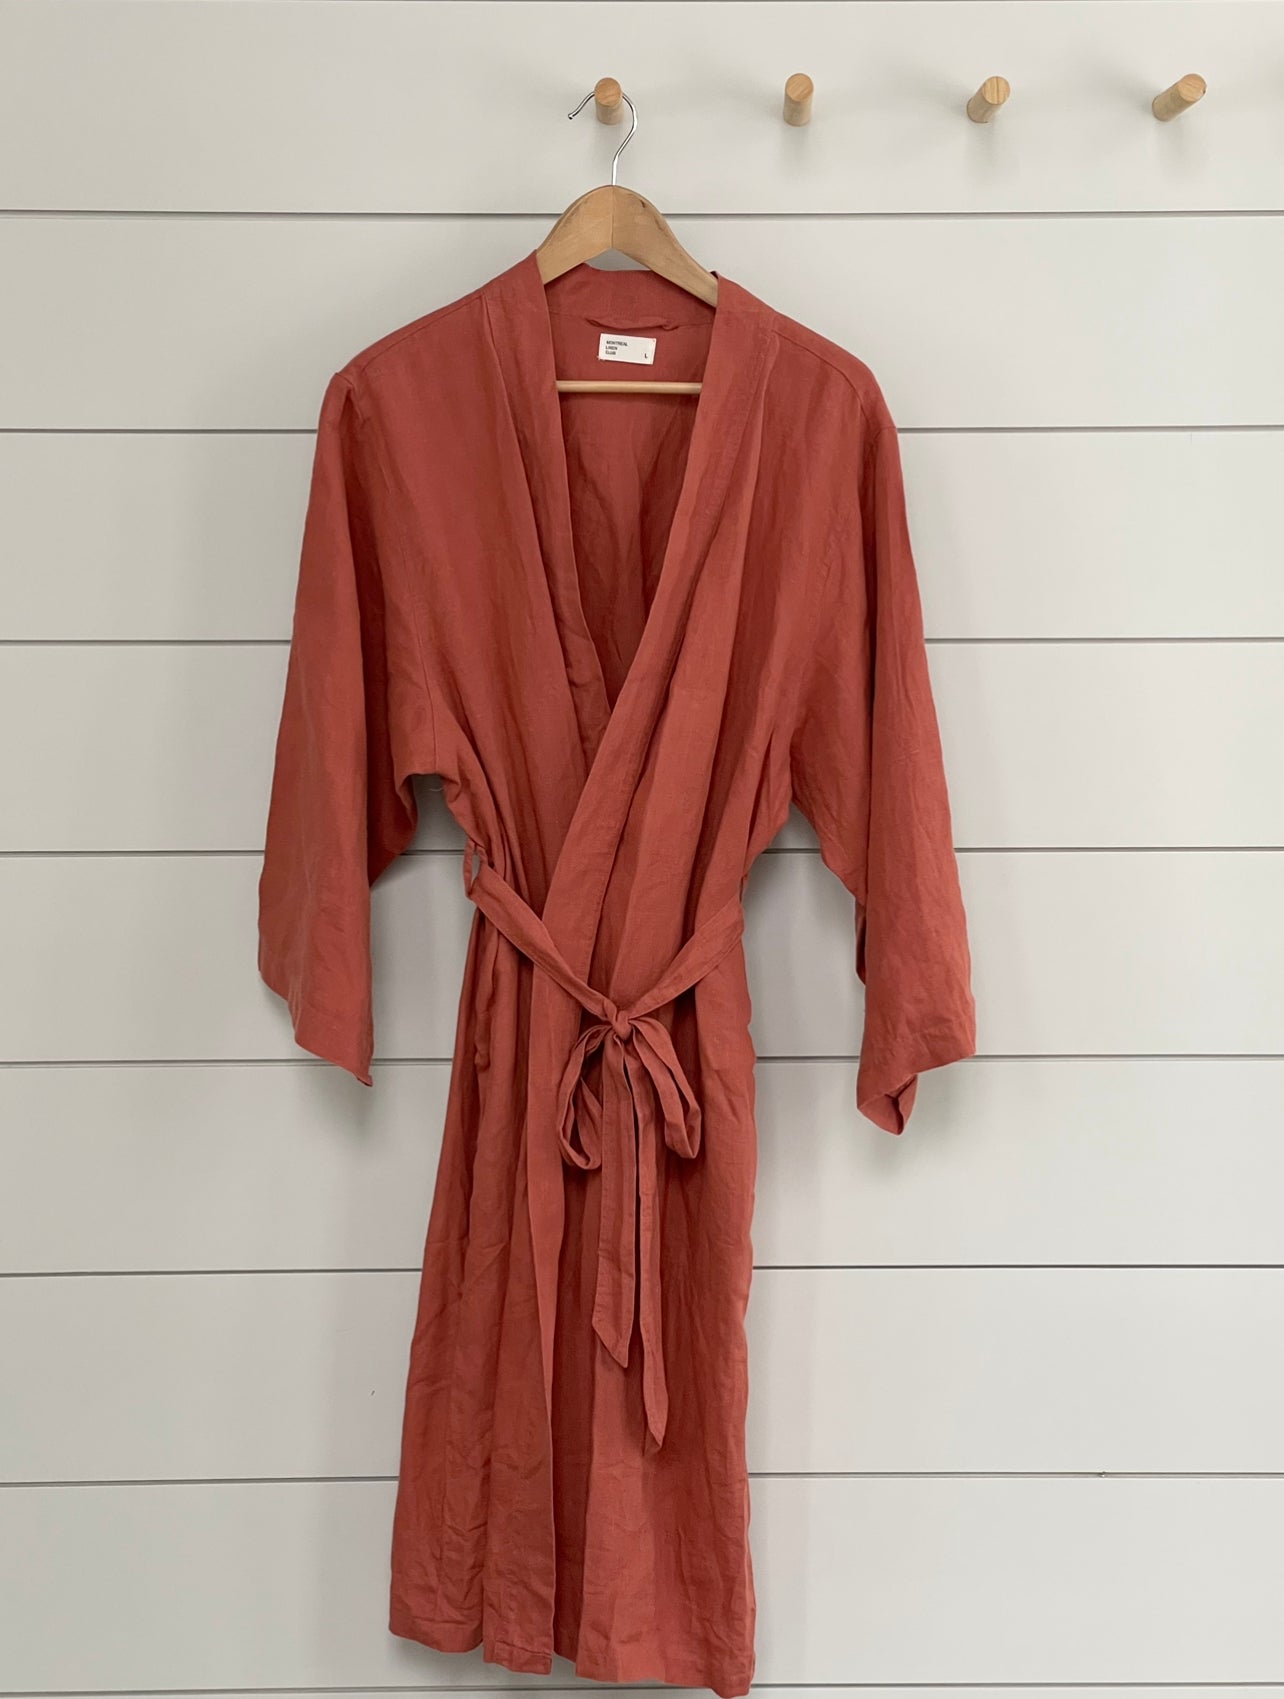 STONEWASH 100% FRENCH FLAX LINEN CLASSIC BATHROBE women-accessories onesky Paprika SMALL IN STOCK